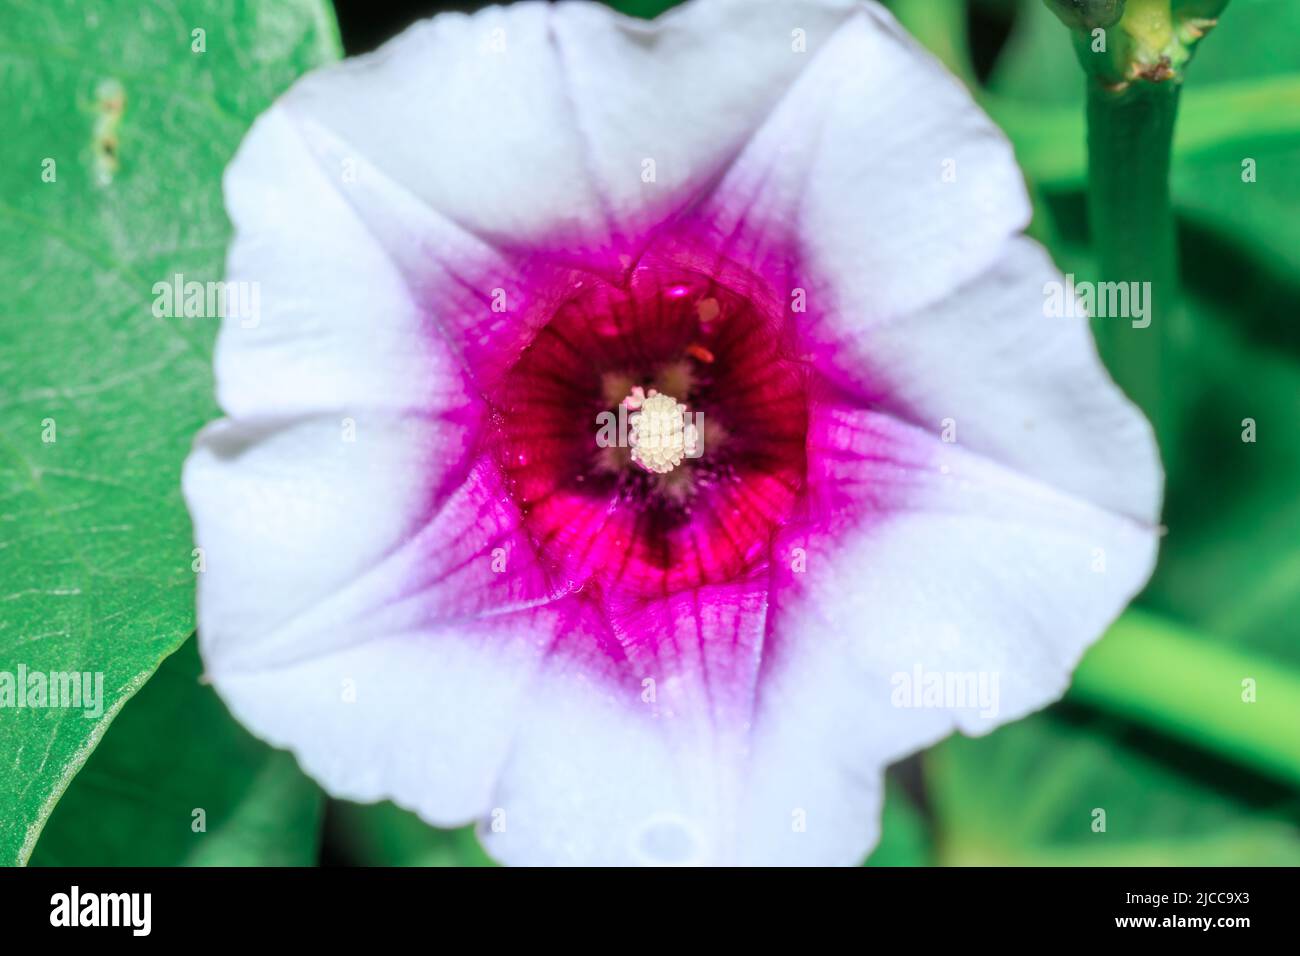 Sweet potato flower (Ipomoea batatas) growing in an agricultural field, Uganda, Africa Stock Photo